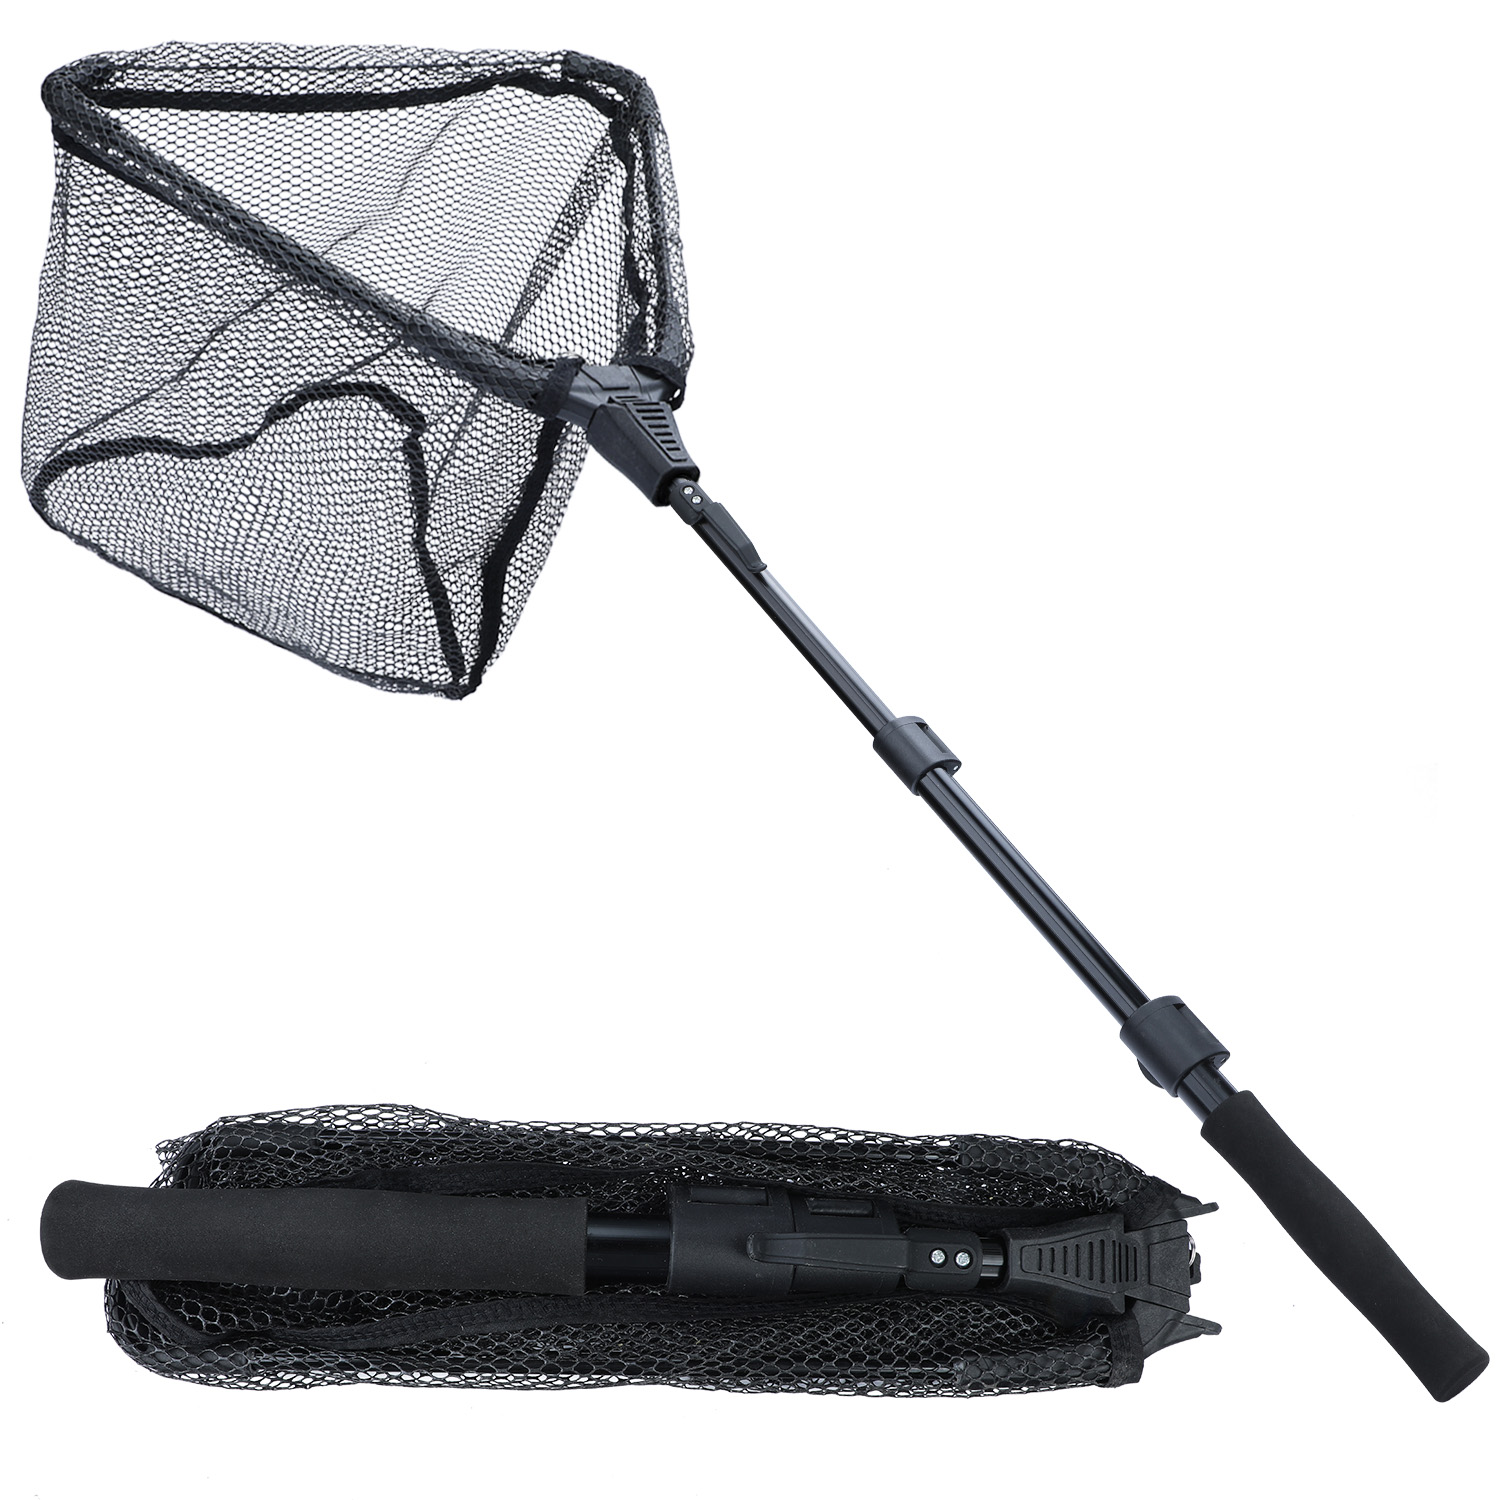 Fishing Net Fish Landing Net Foldable Collapsible Telescopic Pole Handle  Safe Fish Catching or Releasing 